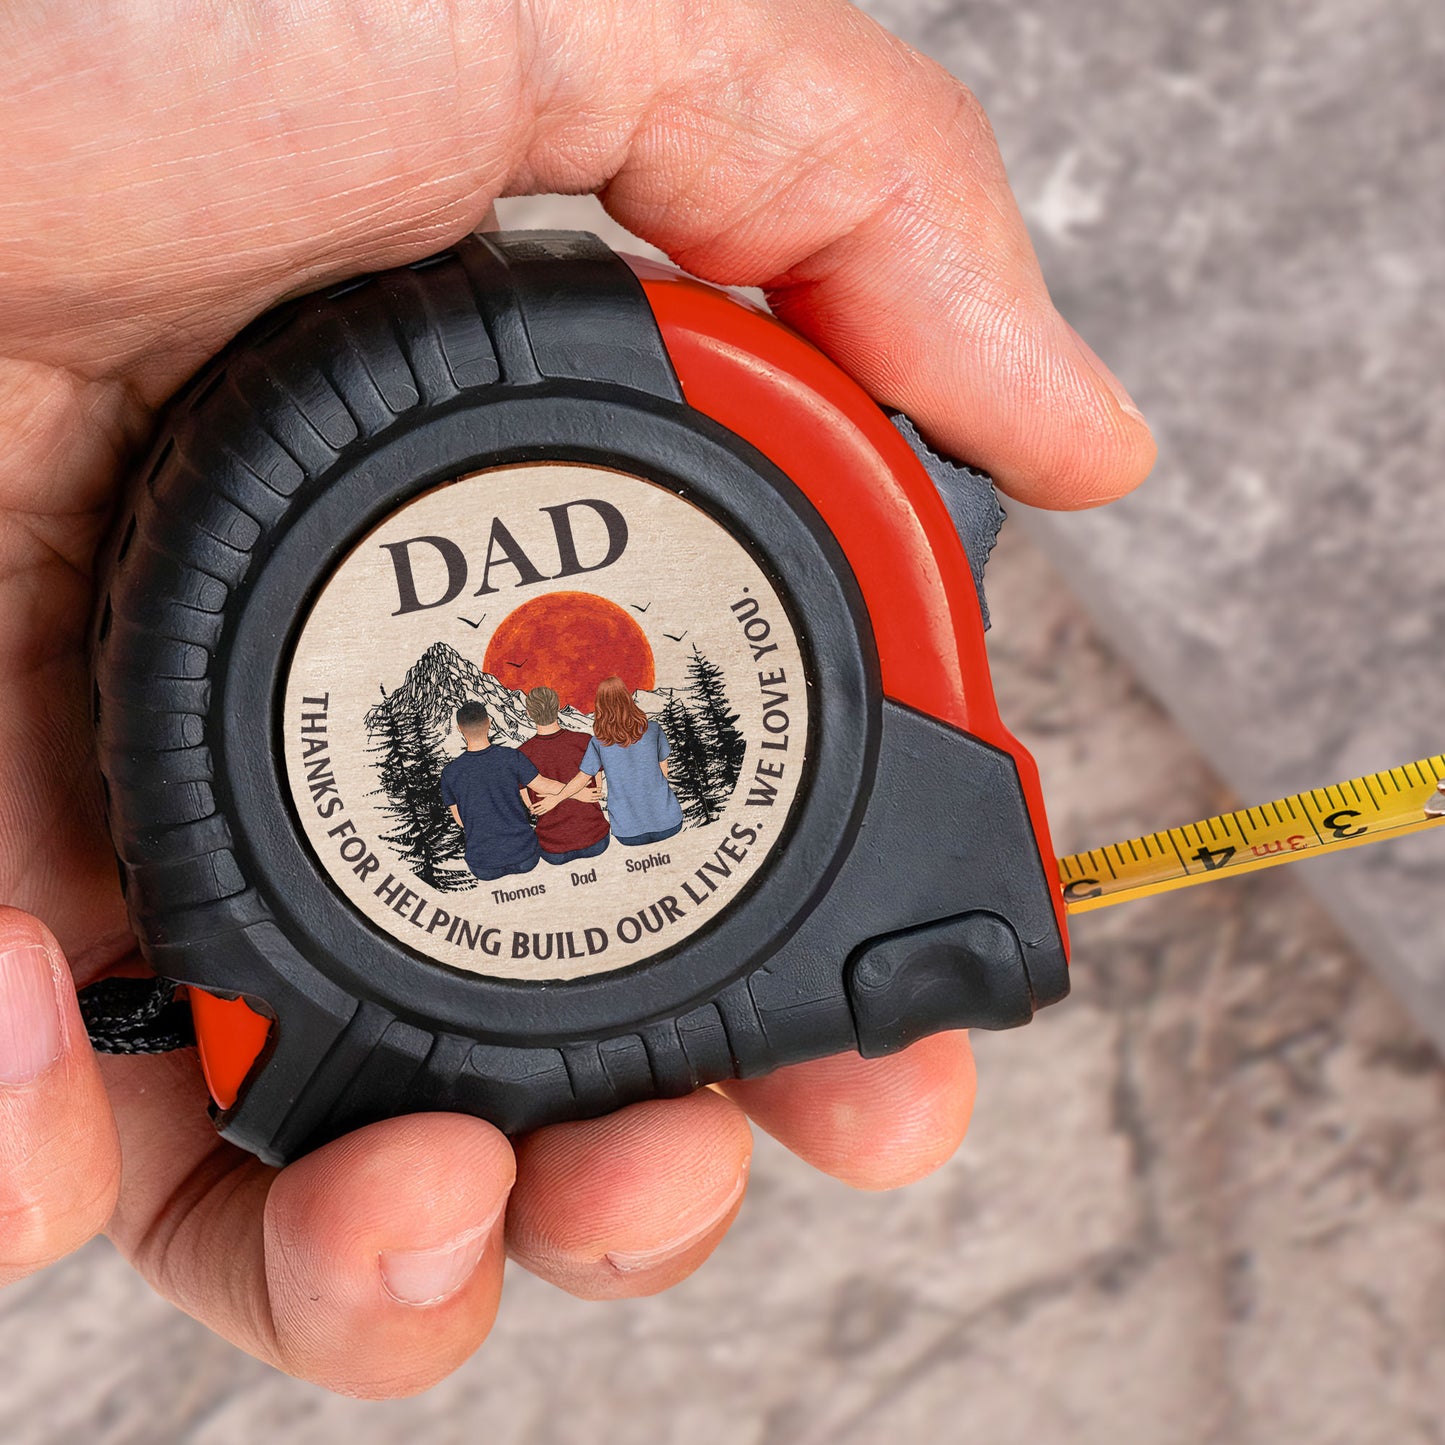 Thanks For Helping Build Our Lives - Personalized Tape Measure